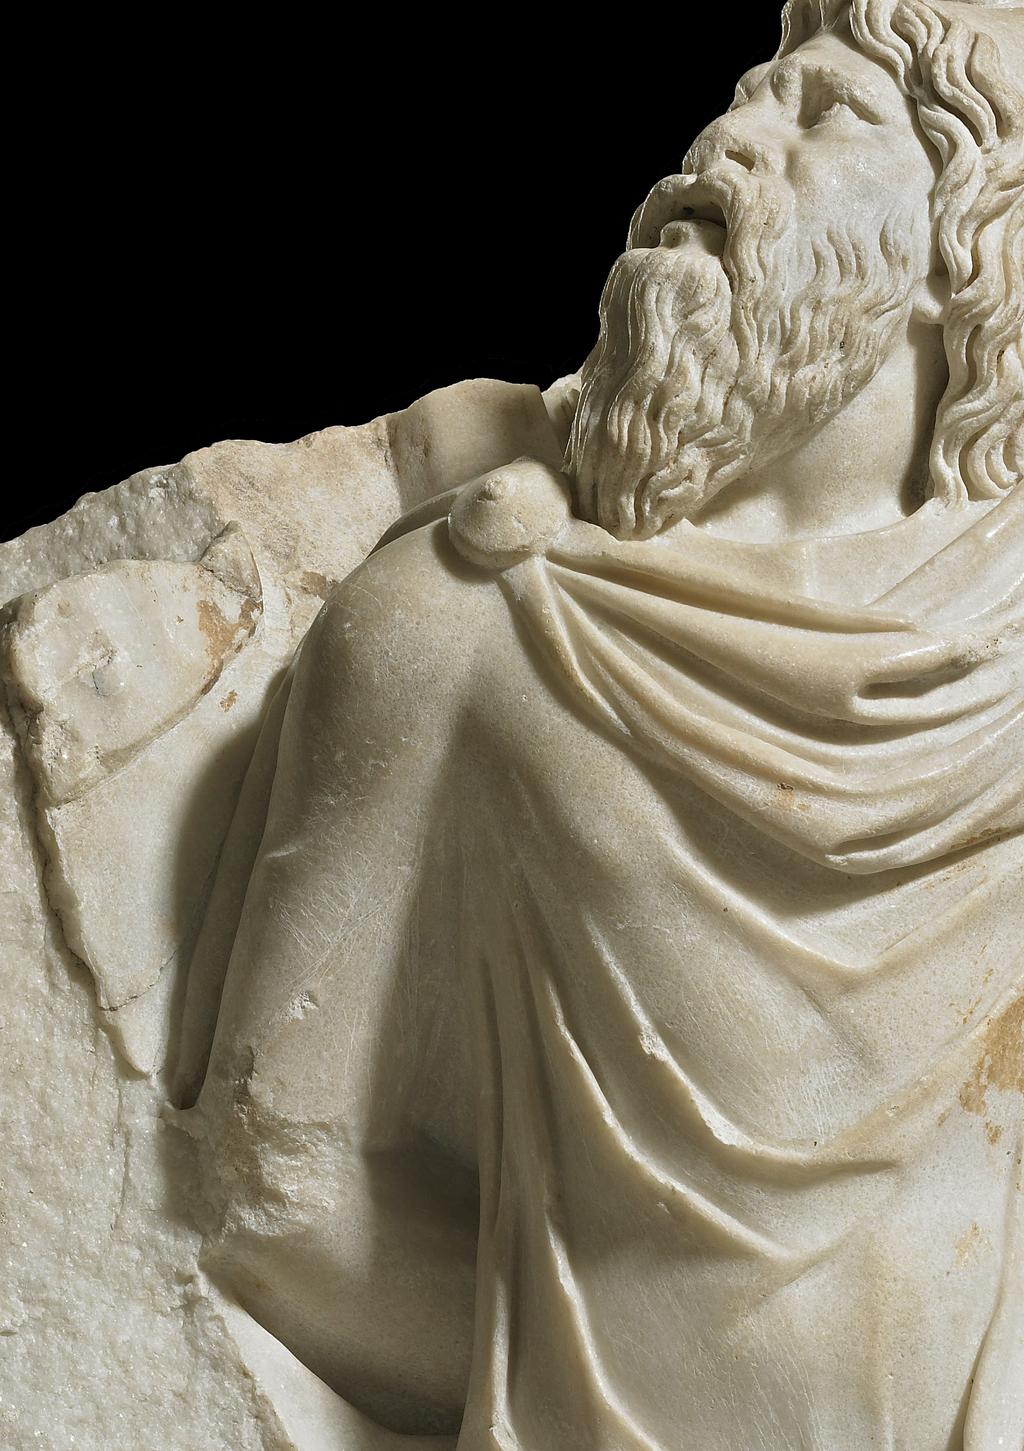 Marble sculpture of a barbarian captive the